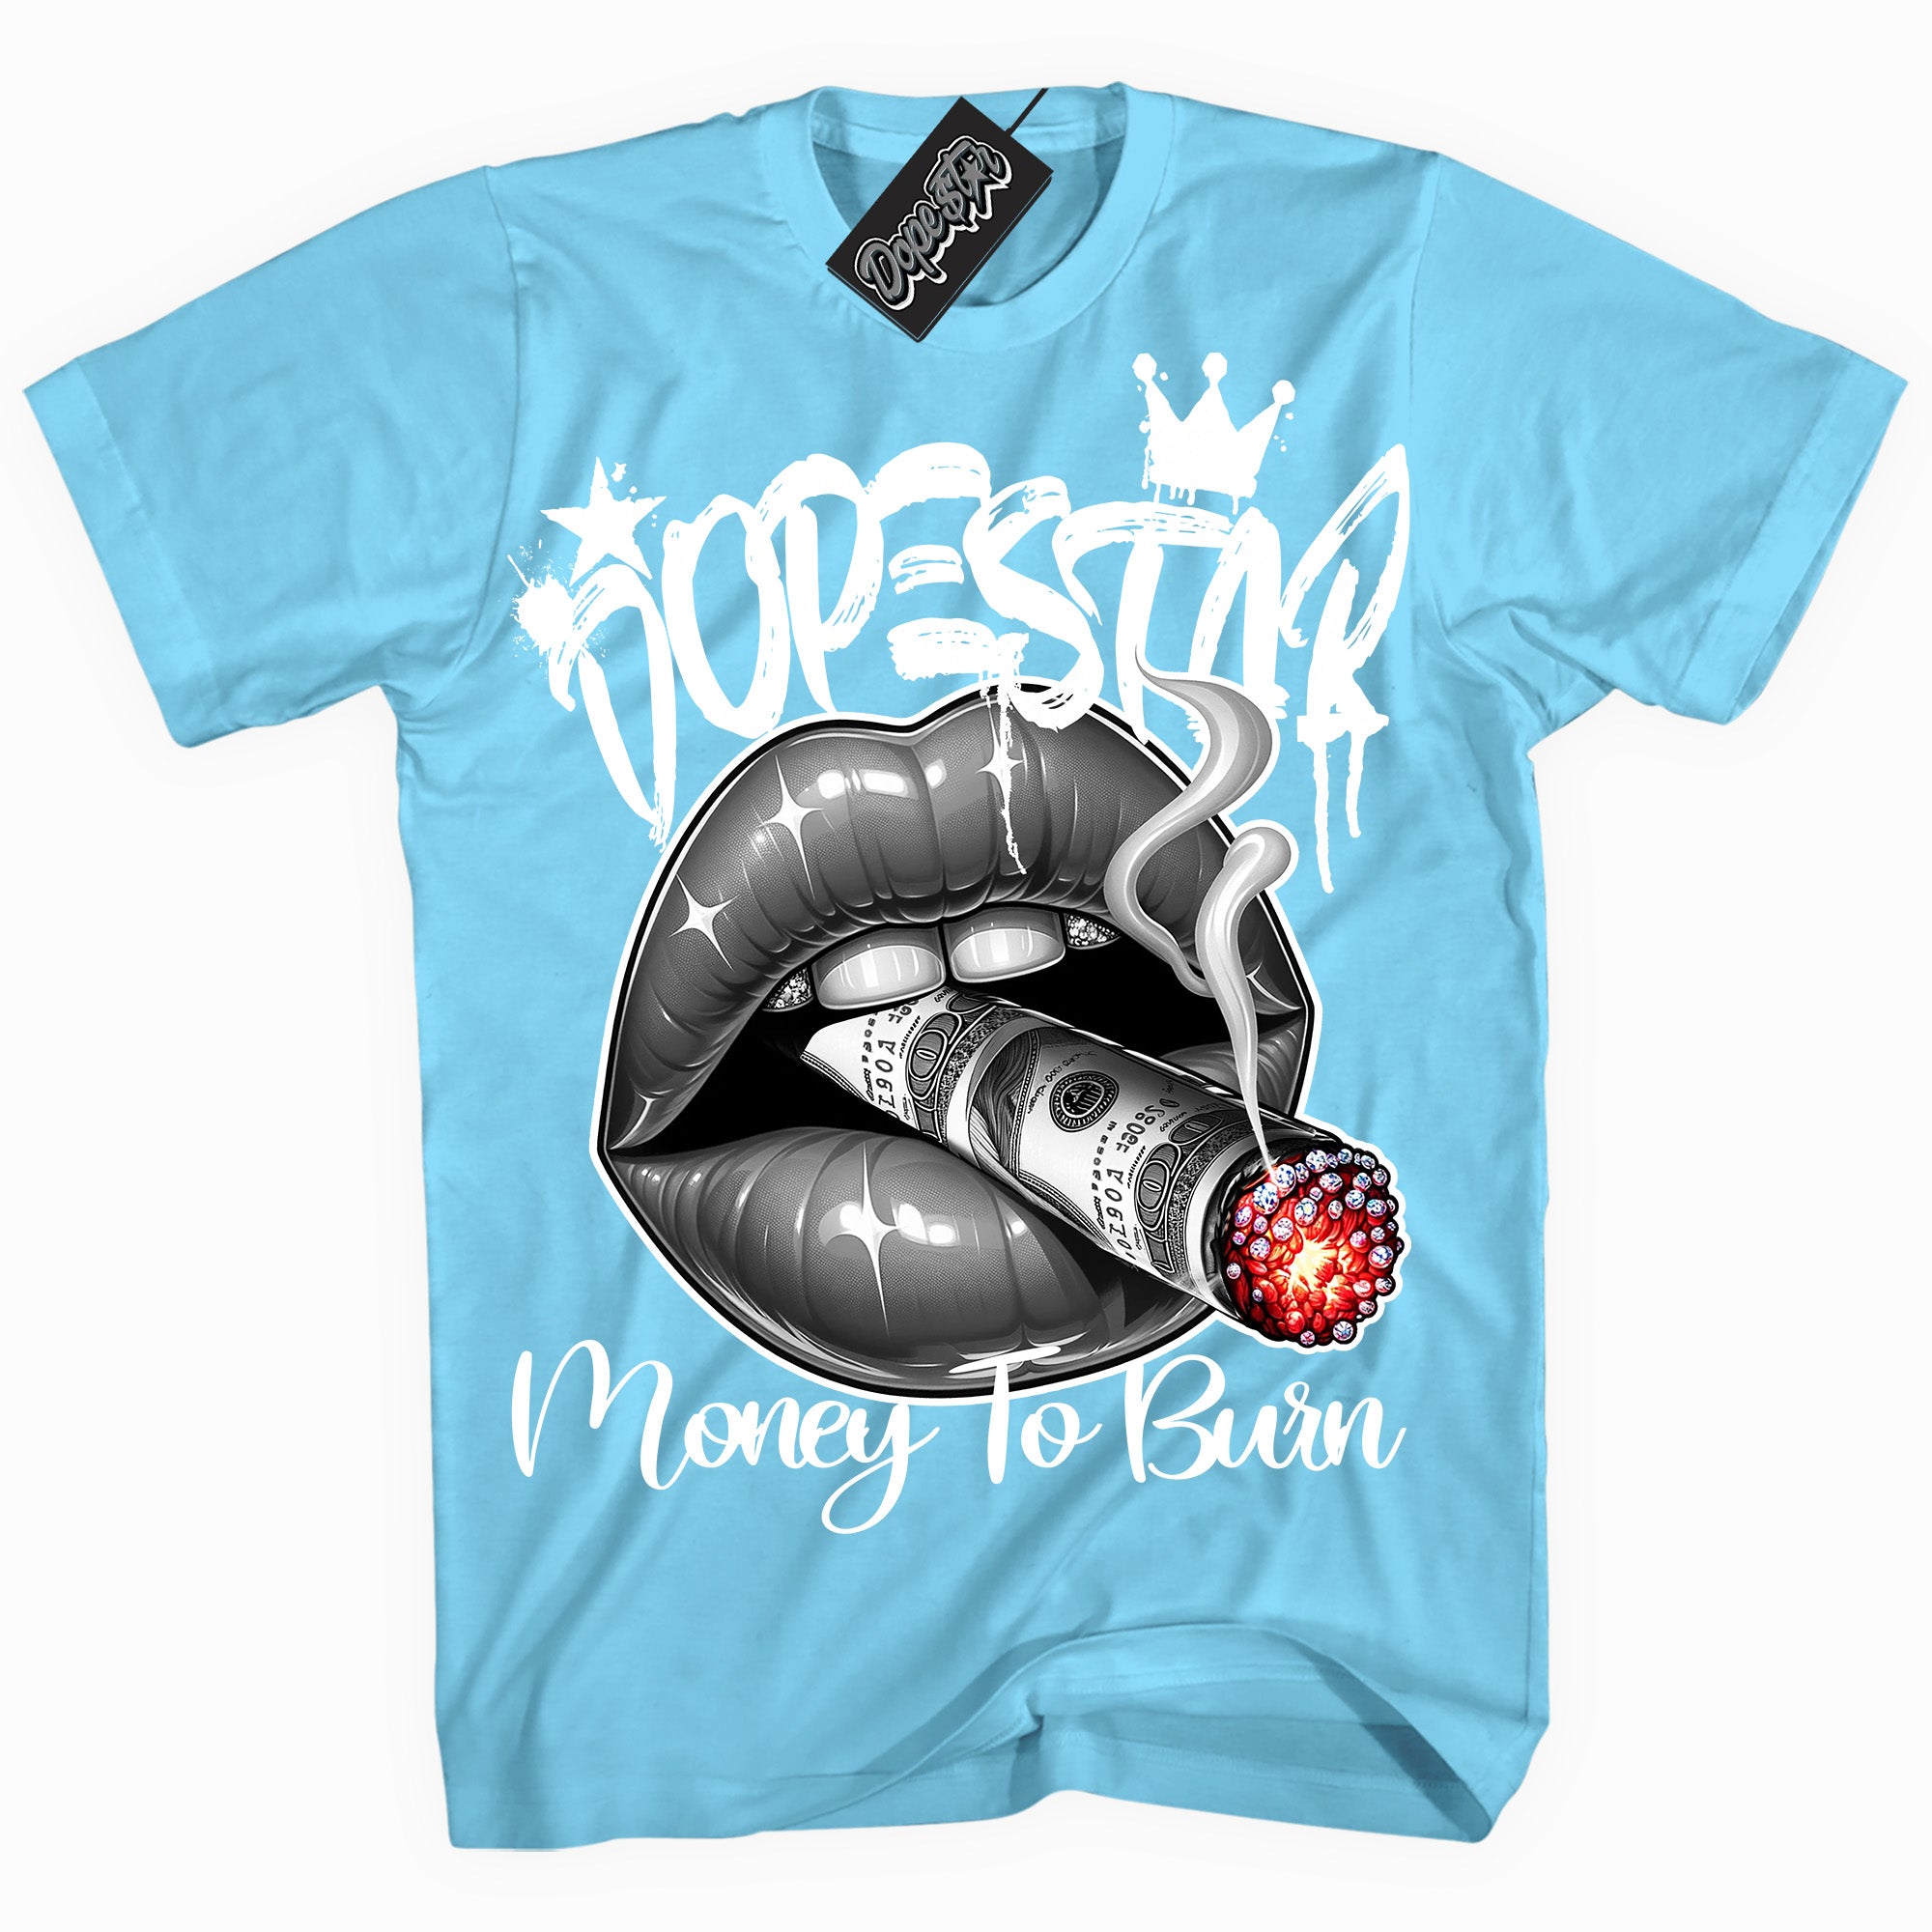 Cool Sky Blue graphic tee with “ Money To Burn ” design, that perfectly matches Powder Blue 9s sneakers